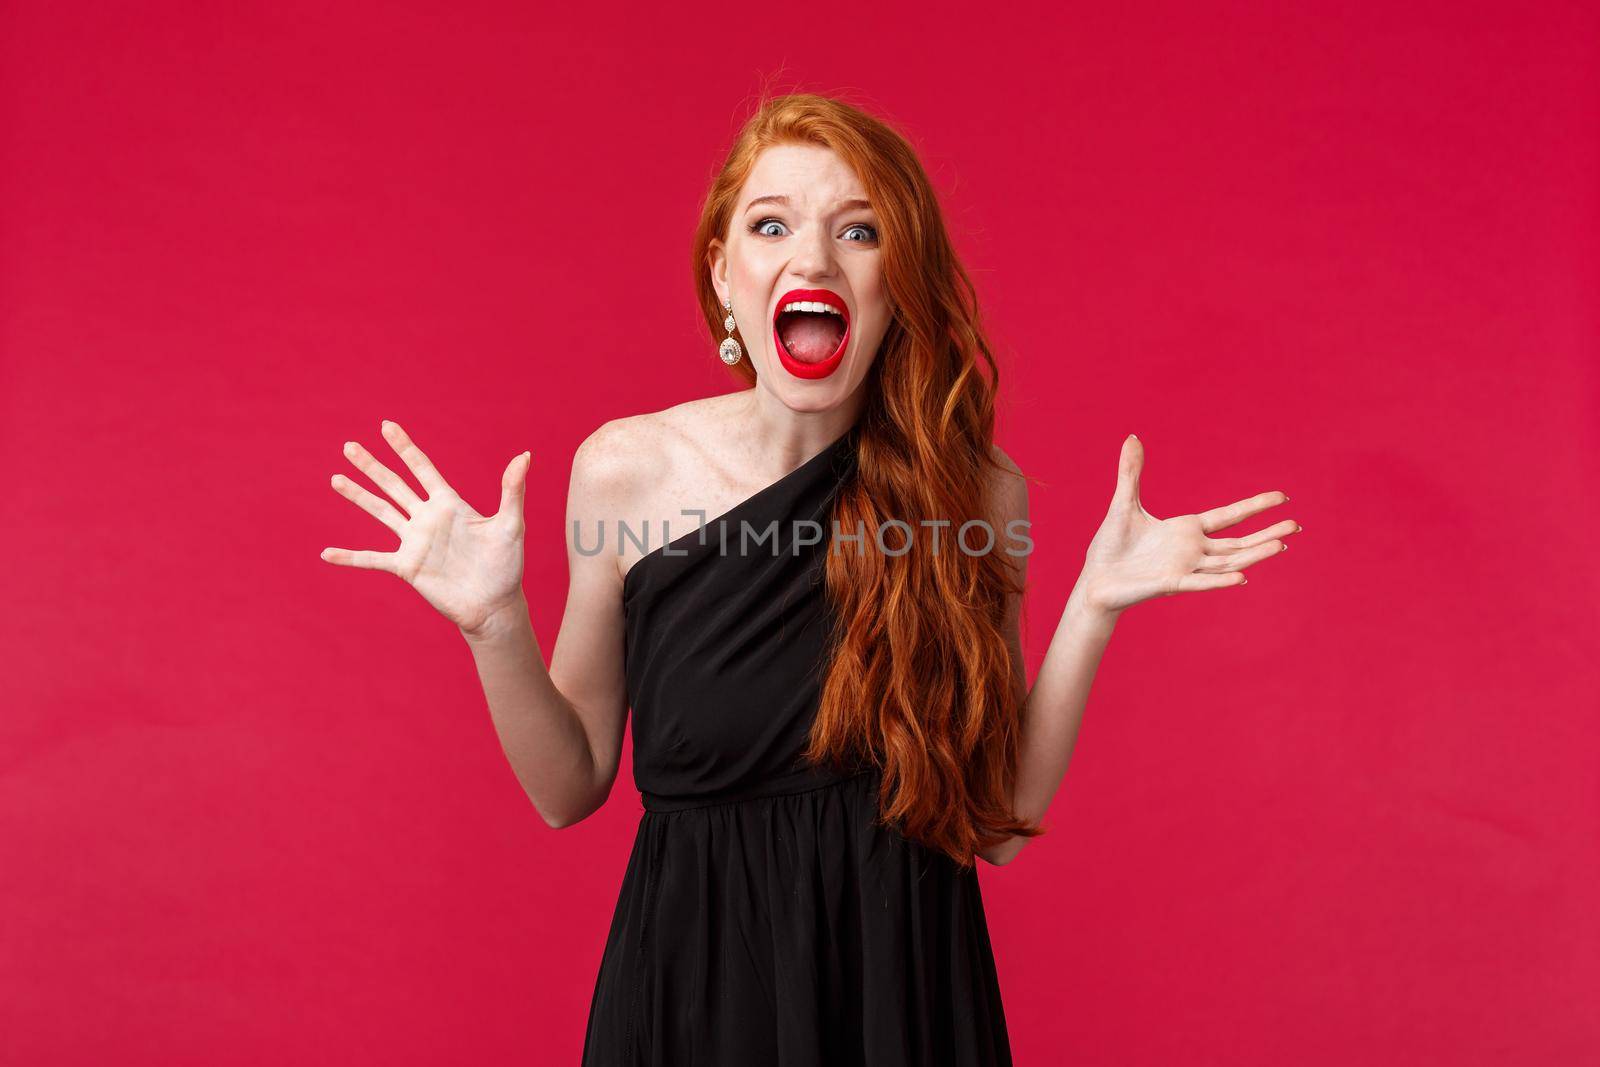 Tensed and aggressive, pissed-off young redhead woman found out best friend slept with her boyfriend, arguing having argument and confrontation on party, screaming at person, red background.